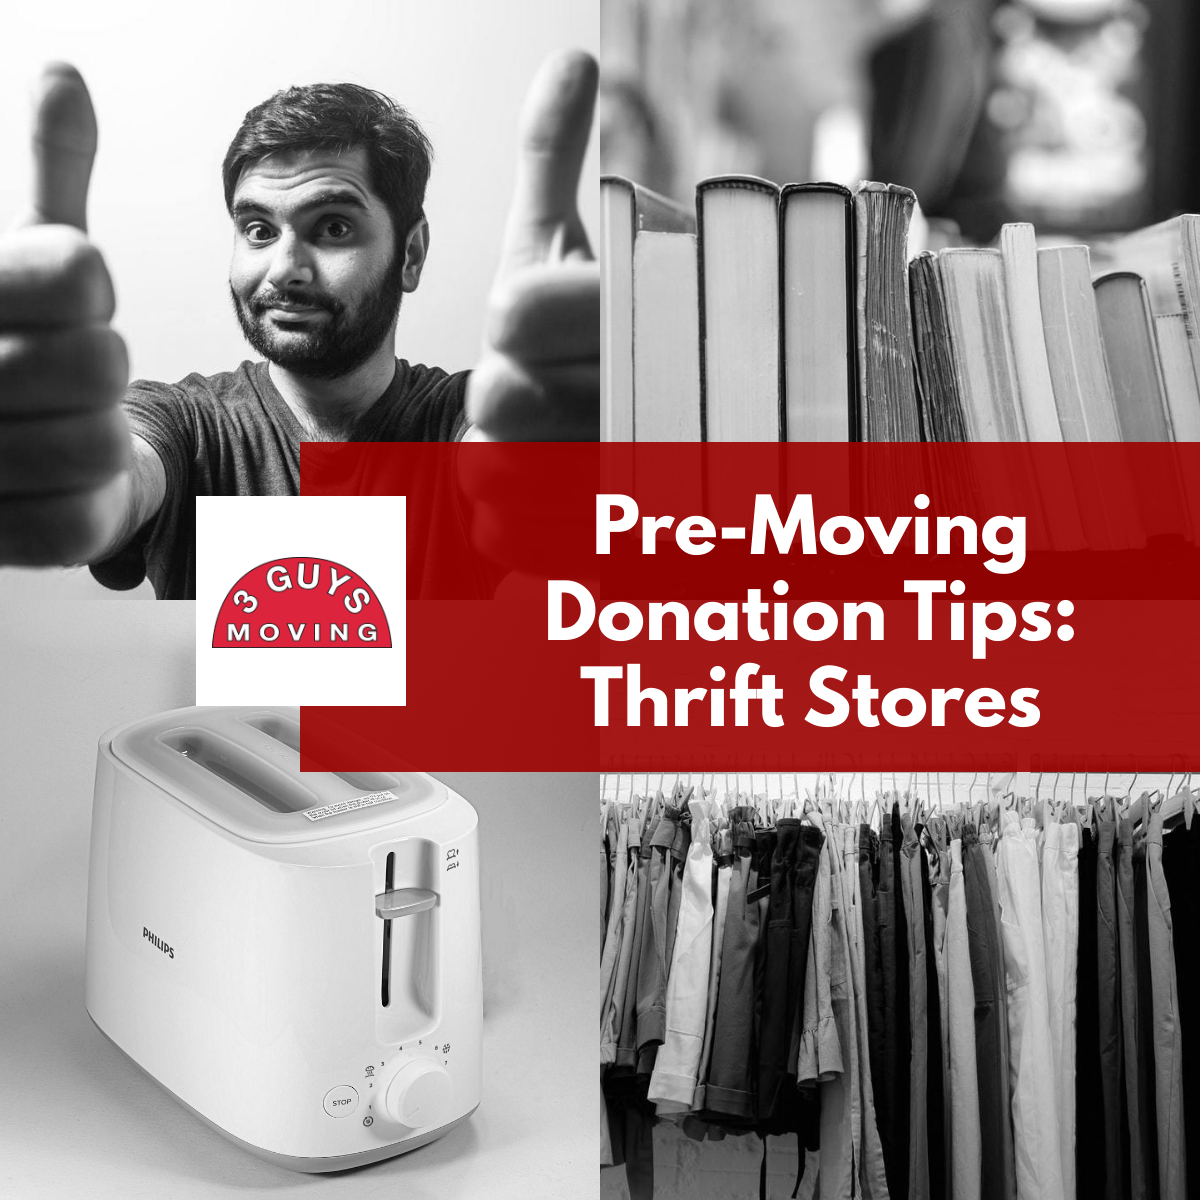 Pre Moving Donation Tip Thrift Stores - Pre-Moving Donation Tips: Thrift Stores